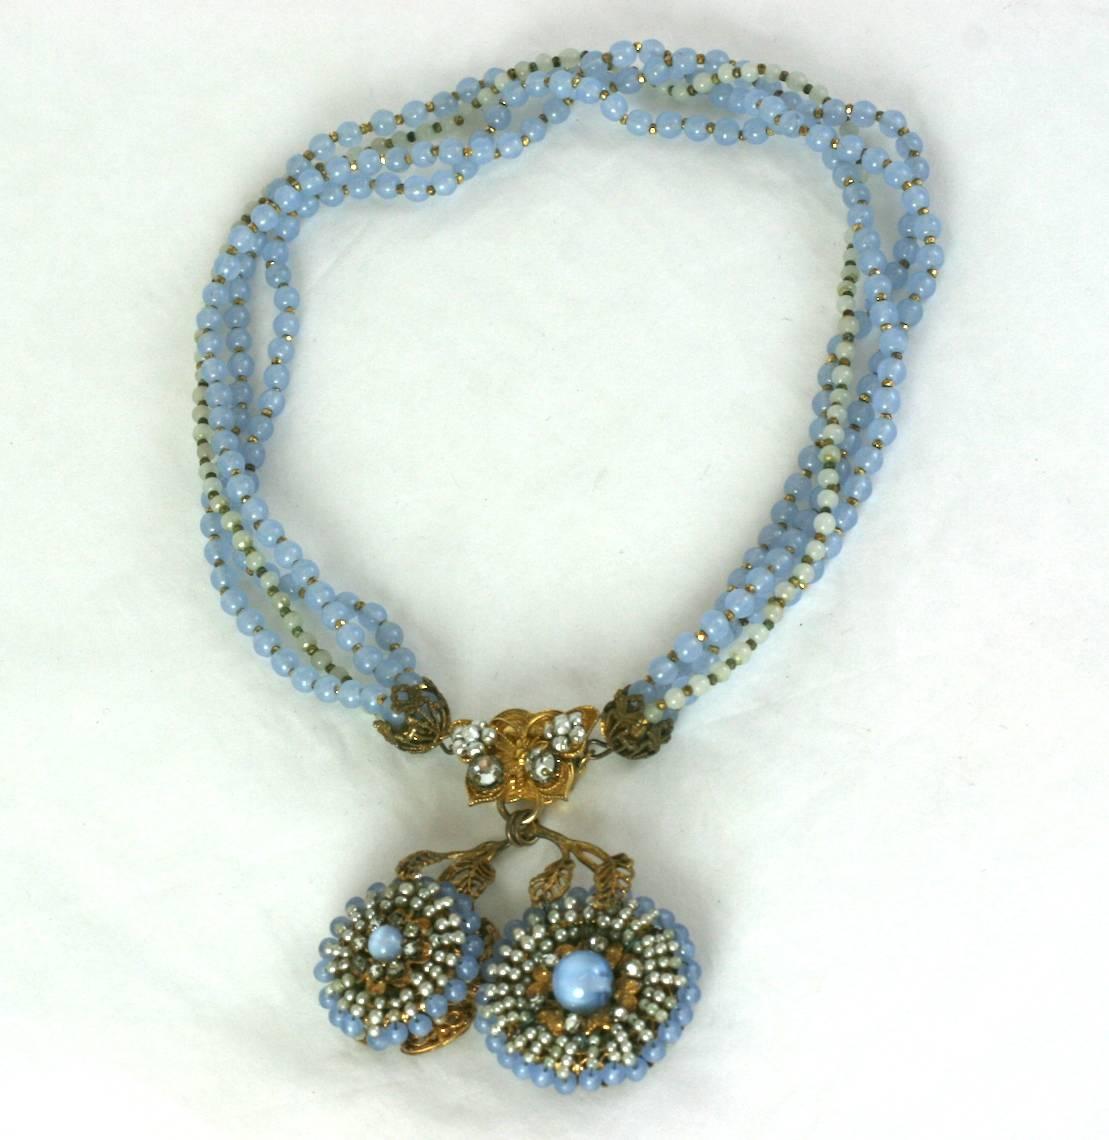 Miriam Haskell multi strand faux white and blue moonstone pate de verre bead necklace. Russian gilt butterfly clasp closure with intricate double flori form pendant of hand sewn, faux seed pearls and faux moonstone beads.
Excellent Condition.